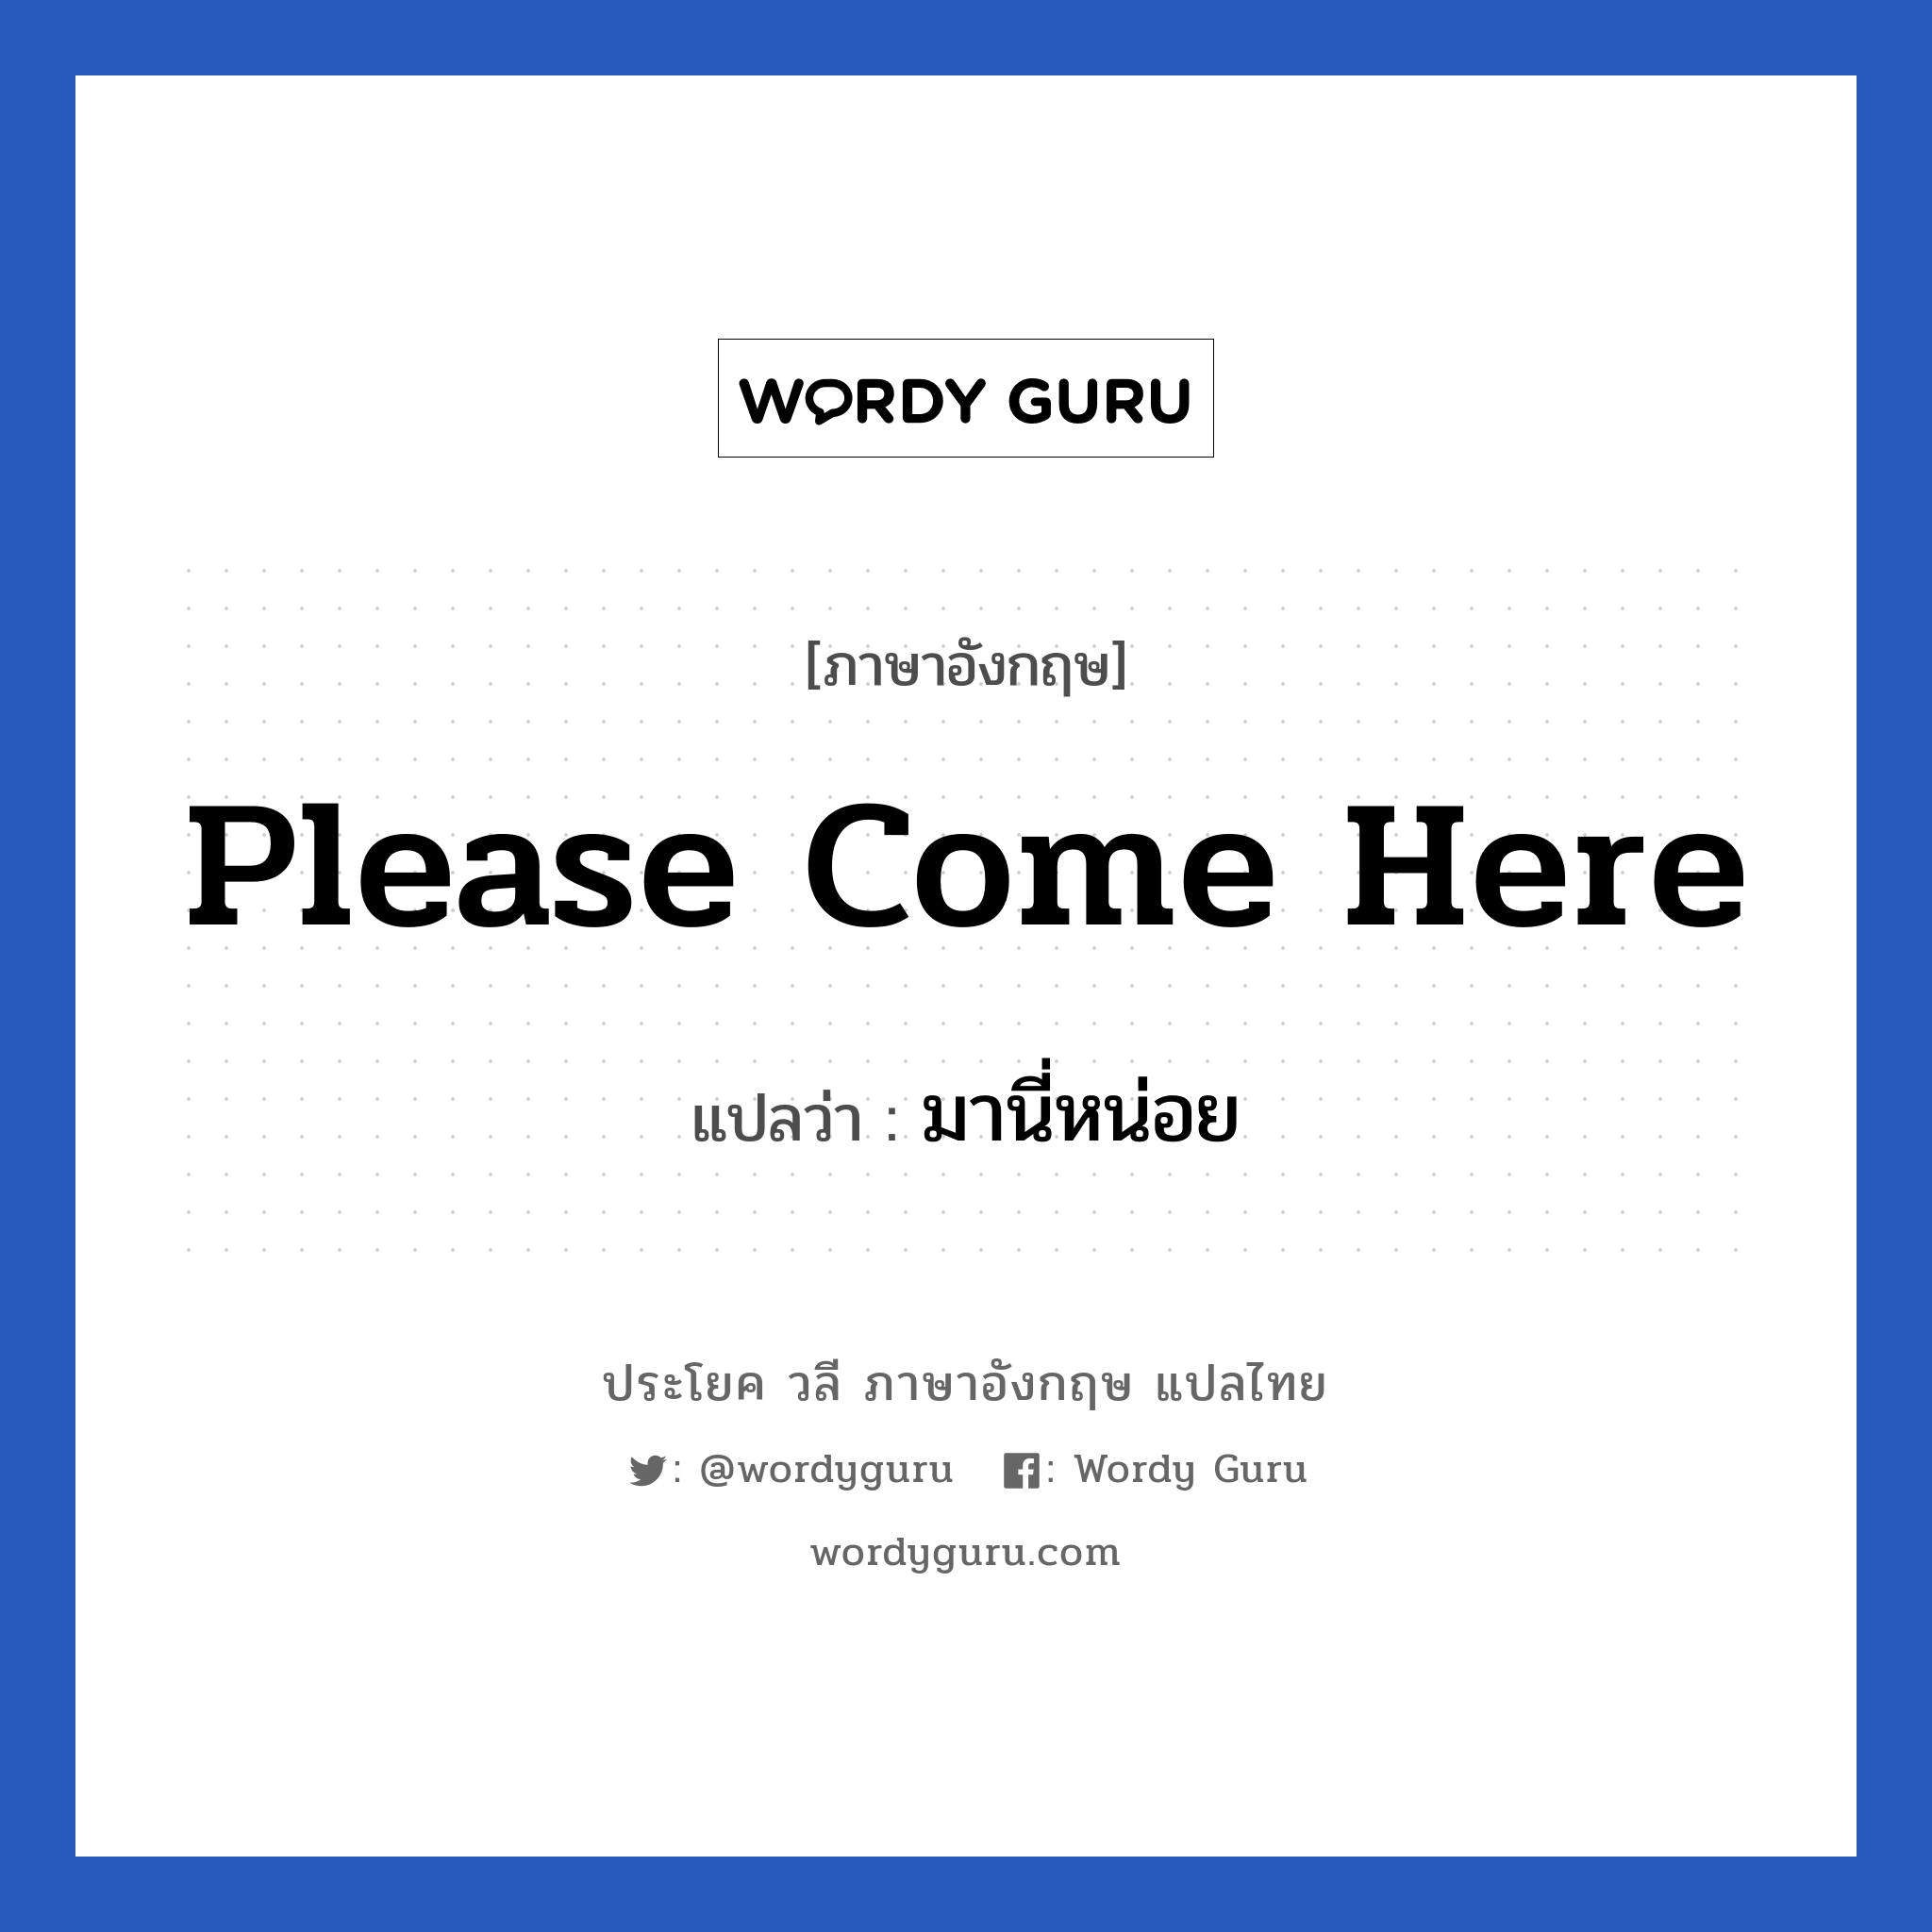 Please come here แปลว่า?, วลีภาษาอังกฤษ Please come here แปลว่า มานี่หน่อย